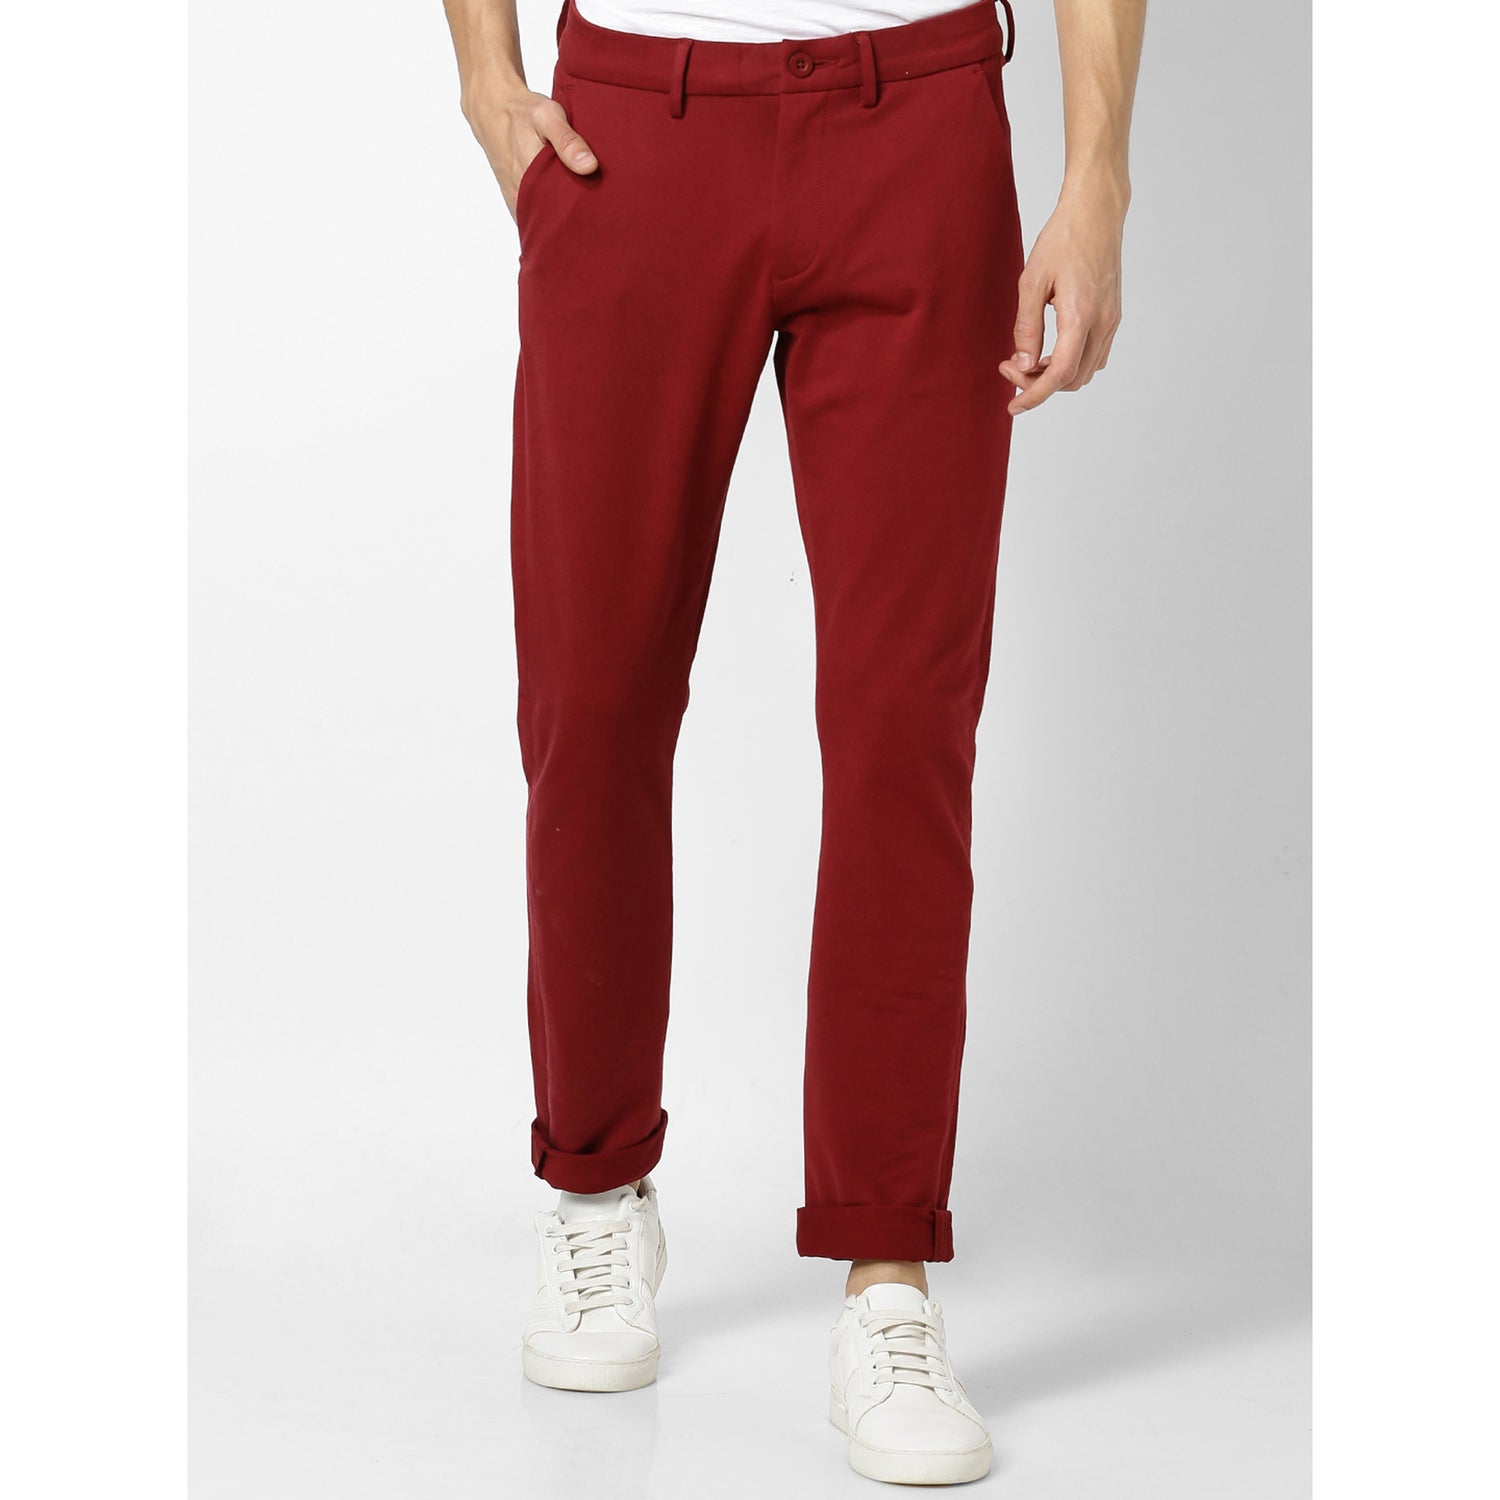 Maroon Classic Chinos Trousers (ROPAKNIT)